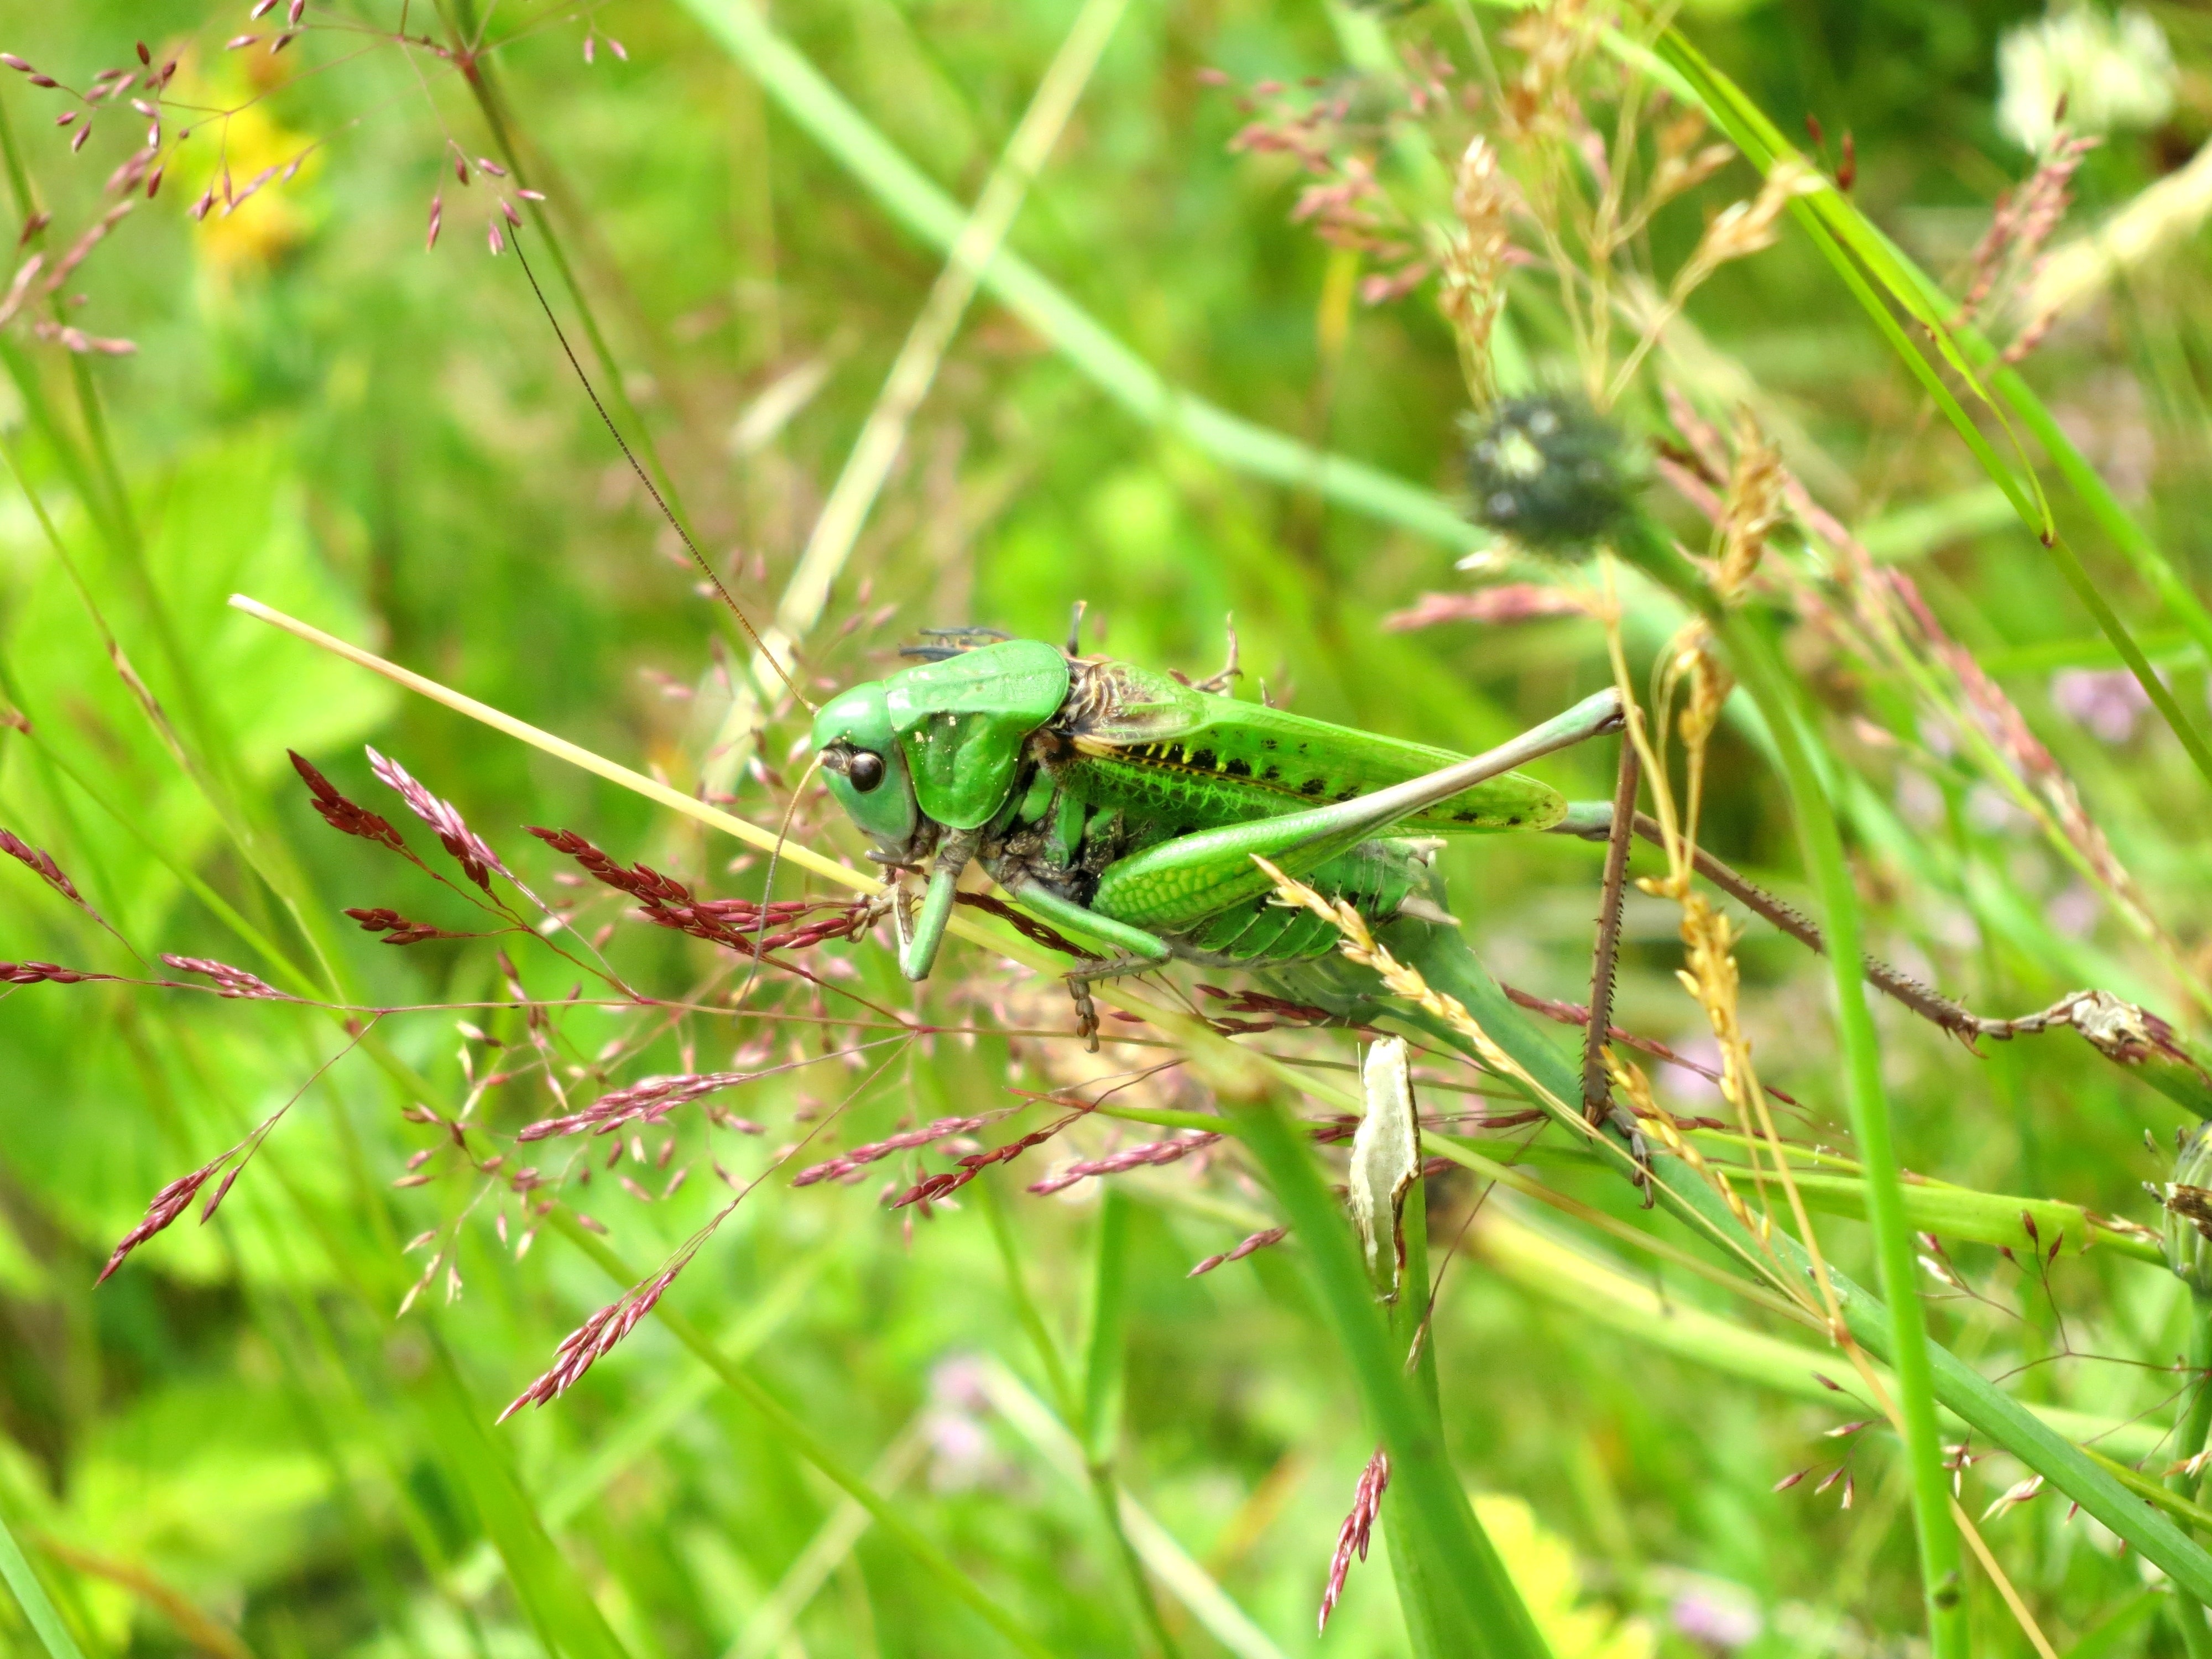 Nature, France, Grasshopper, Green, one animal, animals in the wild